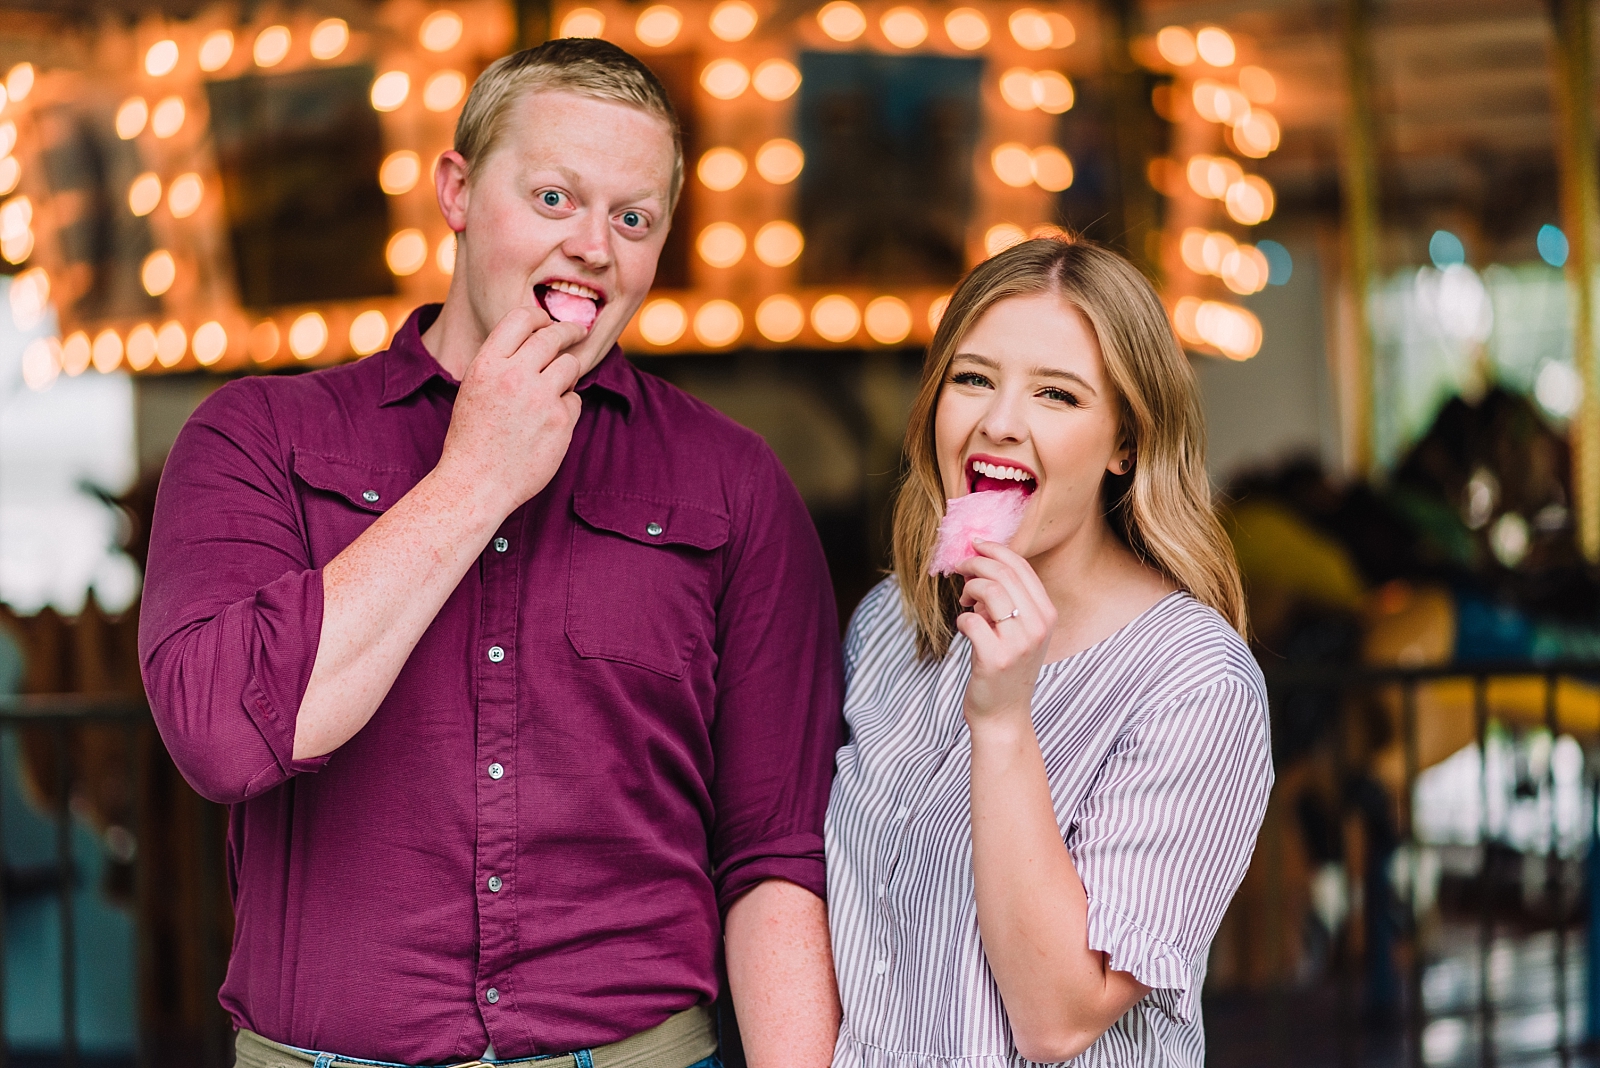 couple eating cotton candy together and making funny faces